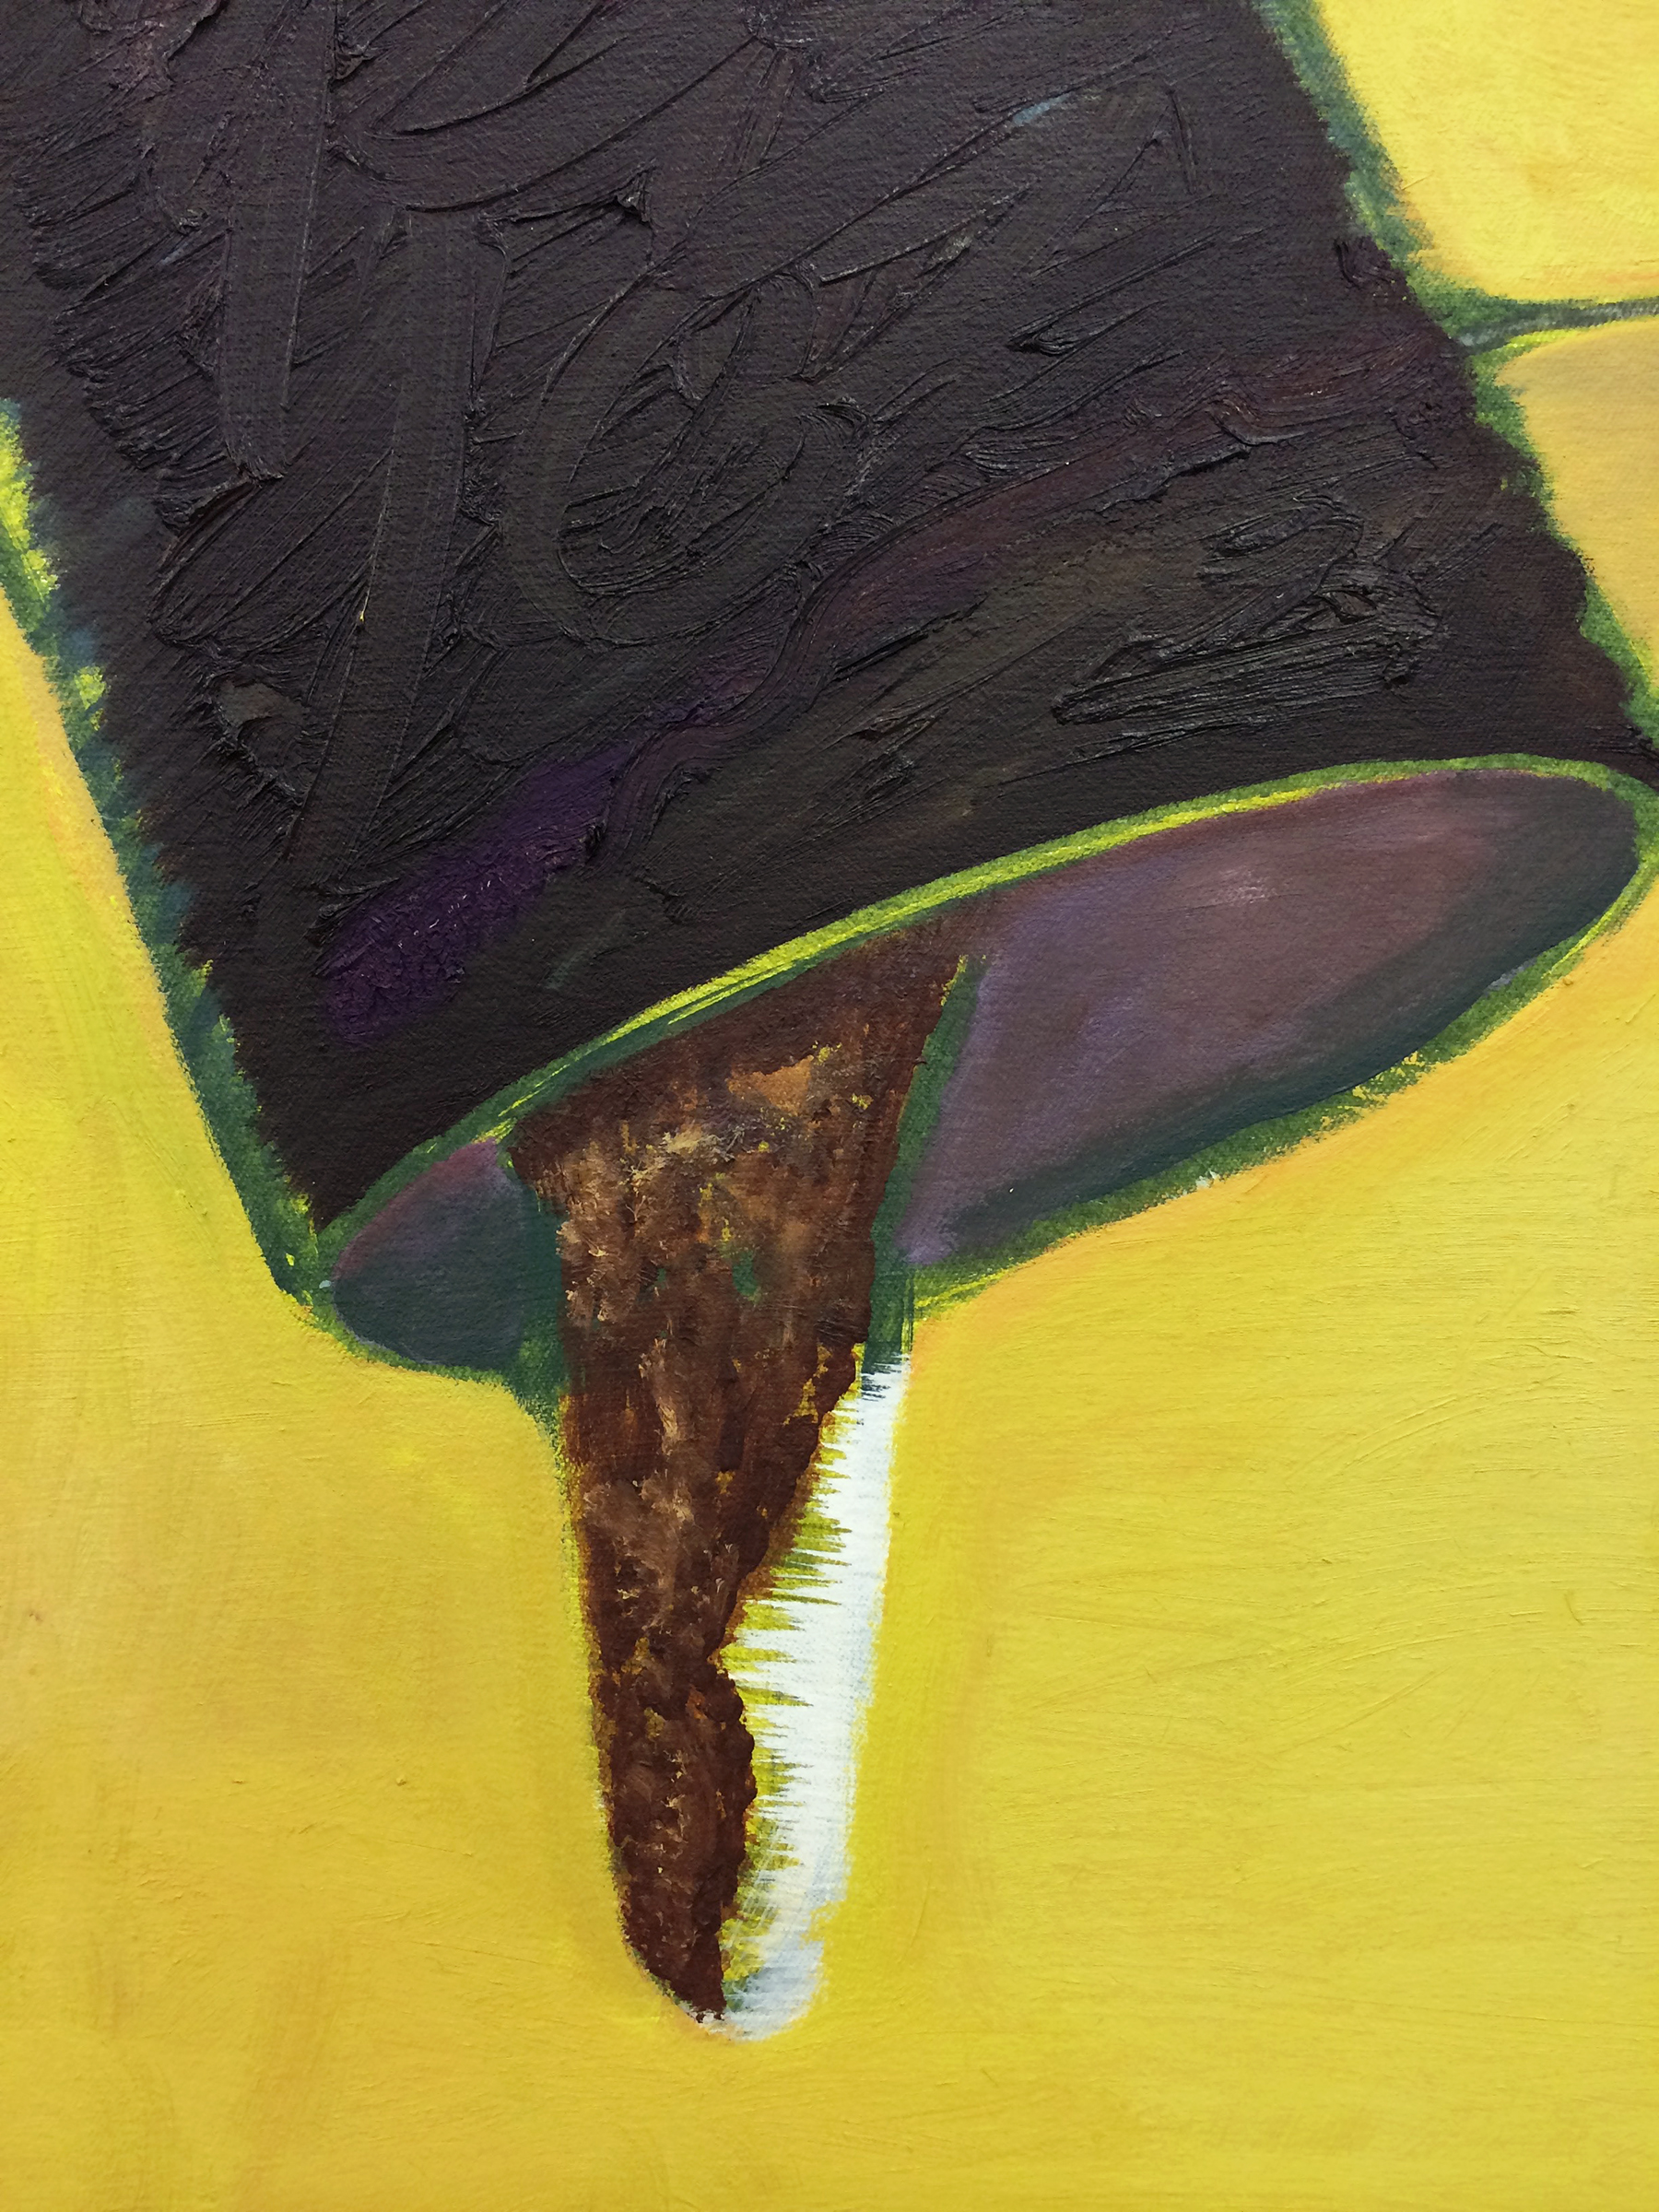   CHRISTOPH ROßNER  (detail)&nbsp; Untitled (CR.026) , 2015, oil and acrylic on canvas, 25.5" x 19.5" 